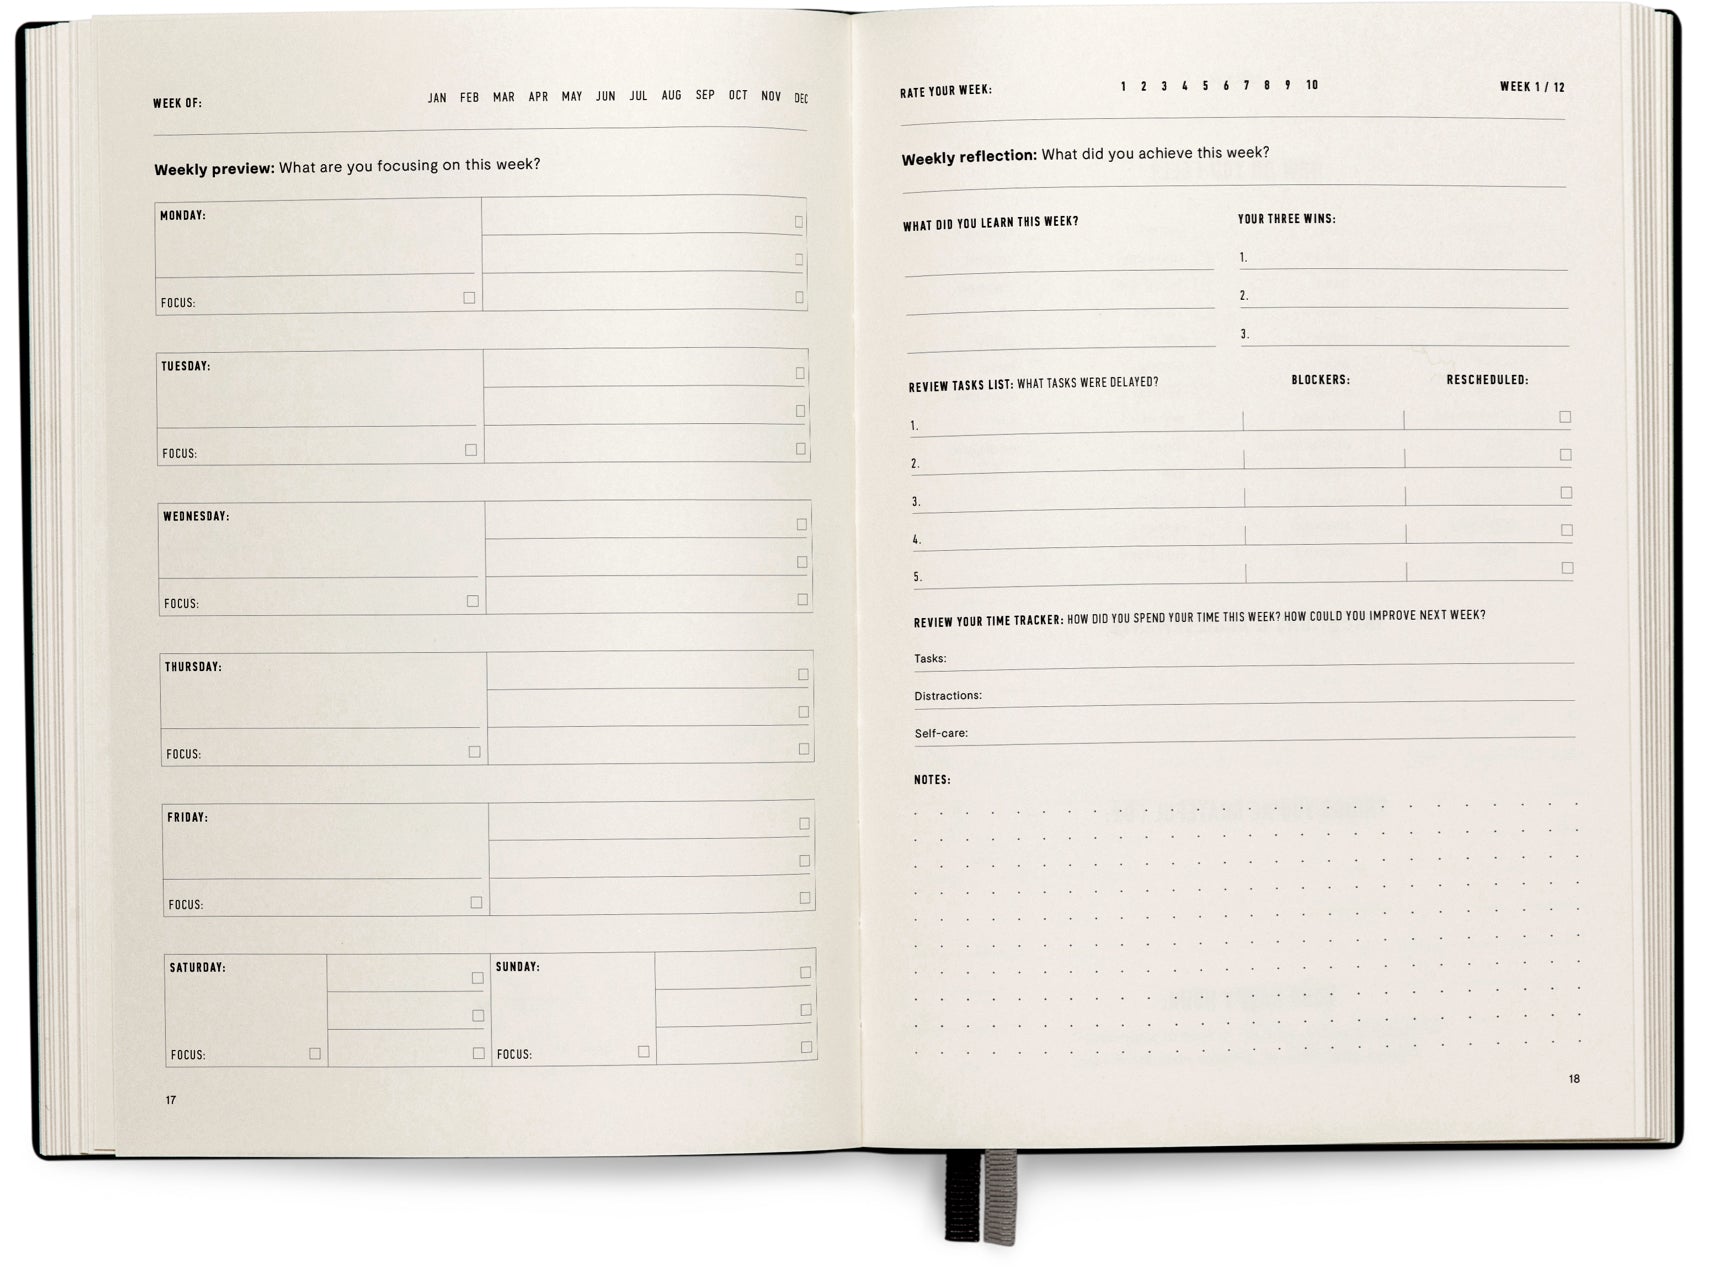 An example of blank pages in the MindJournal